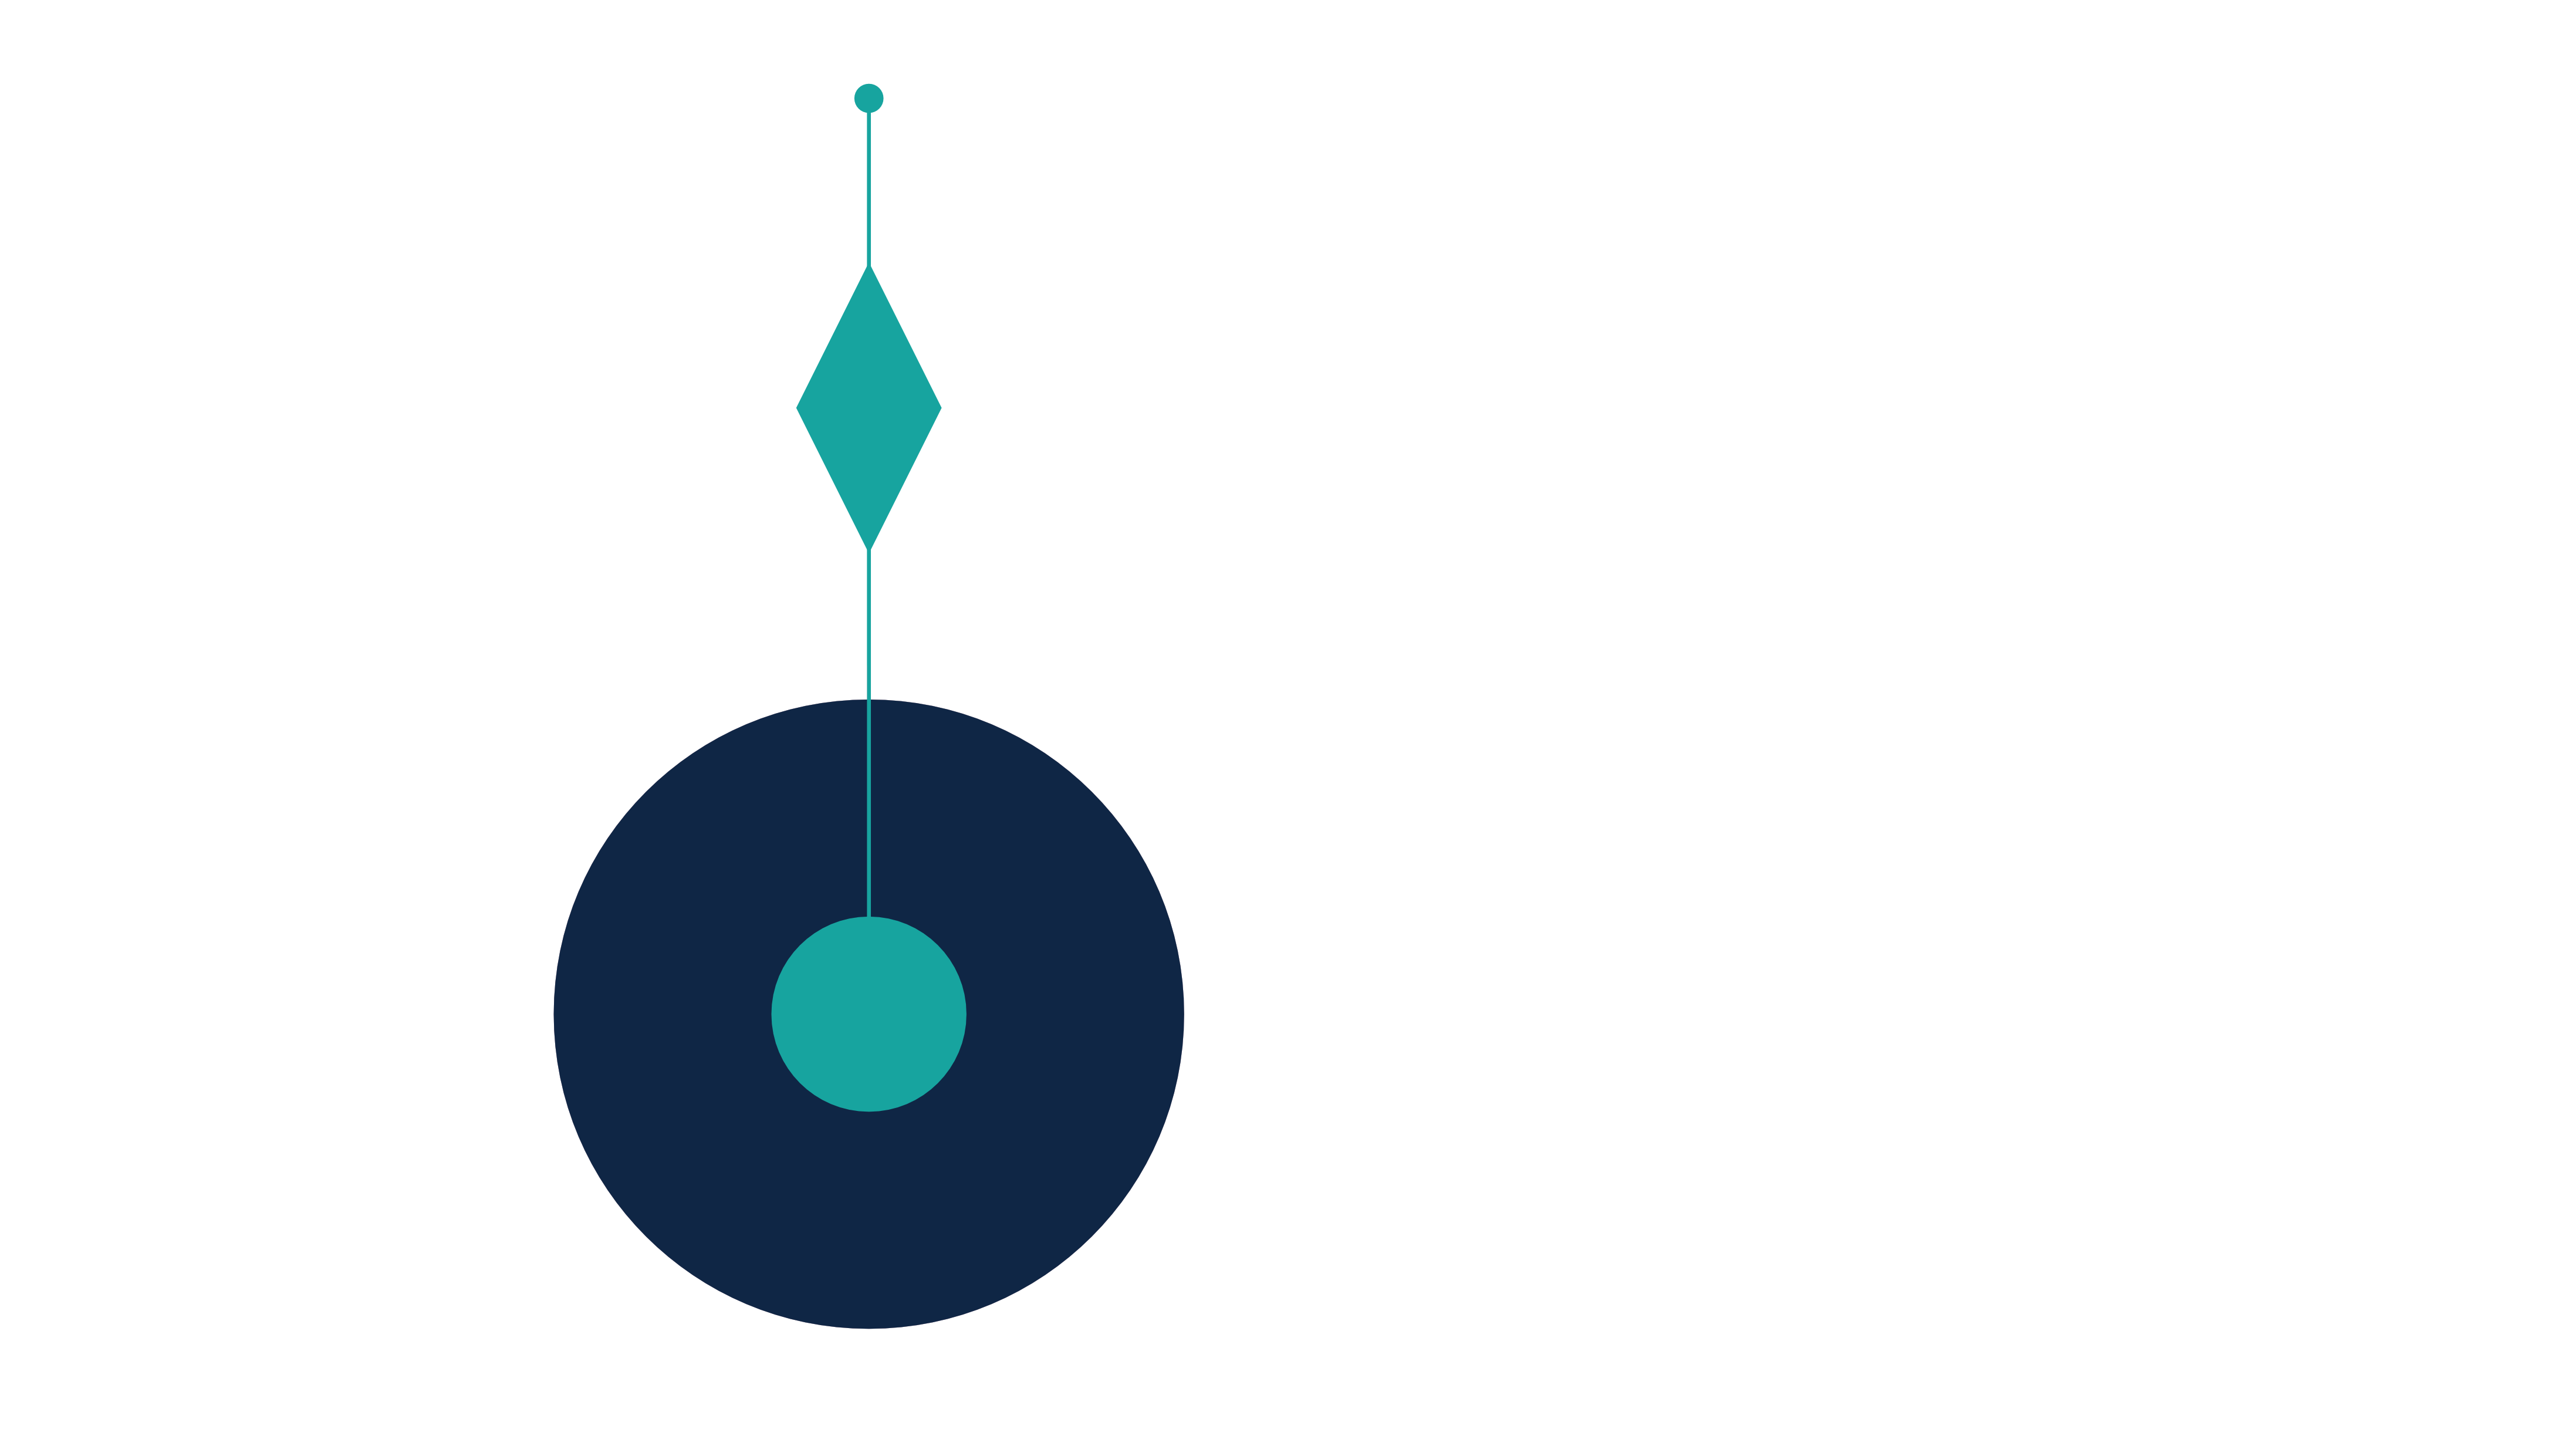 Syzygy - Connection